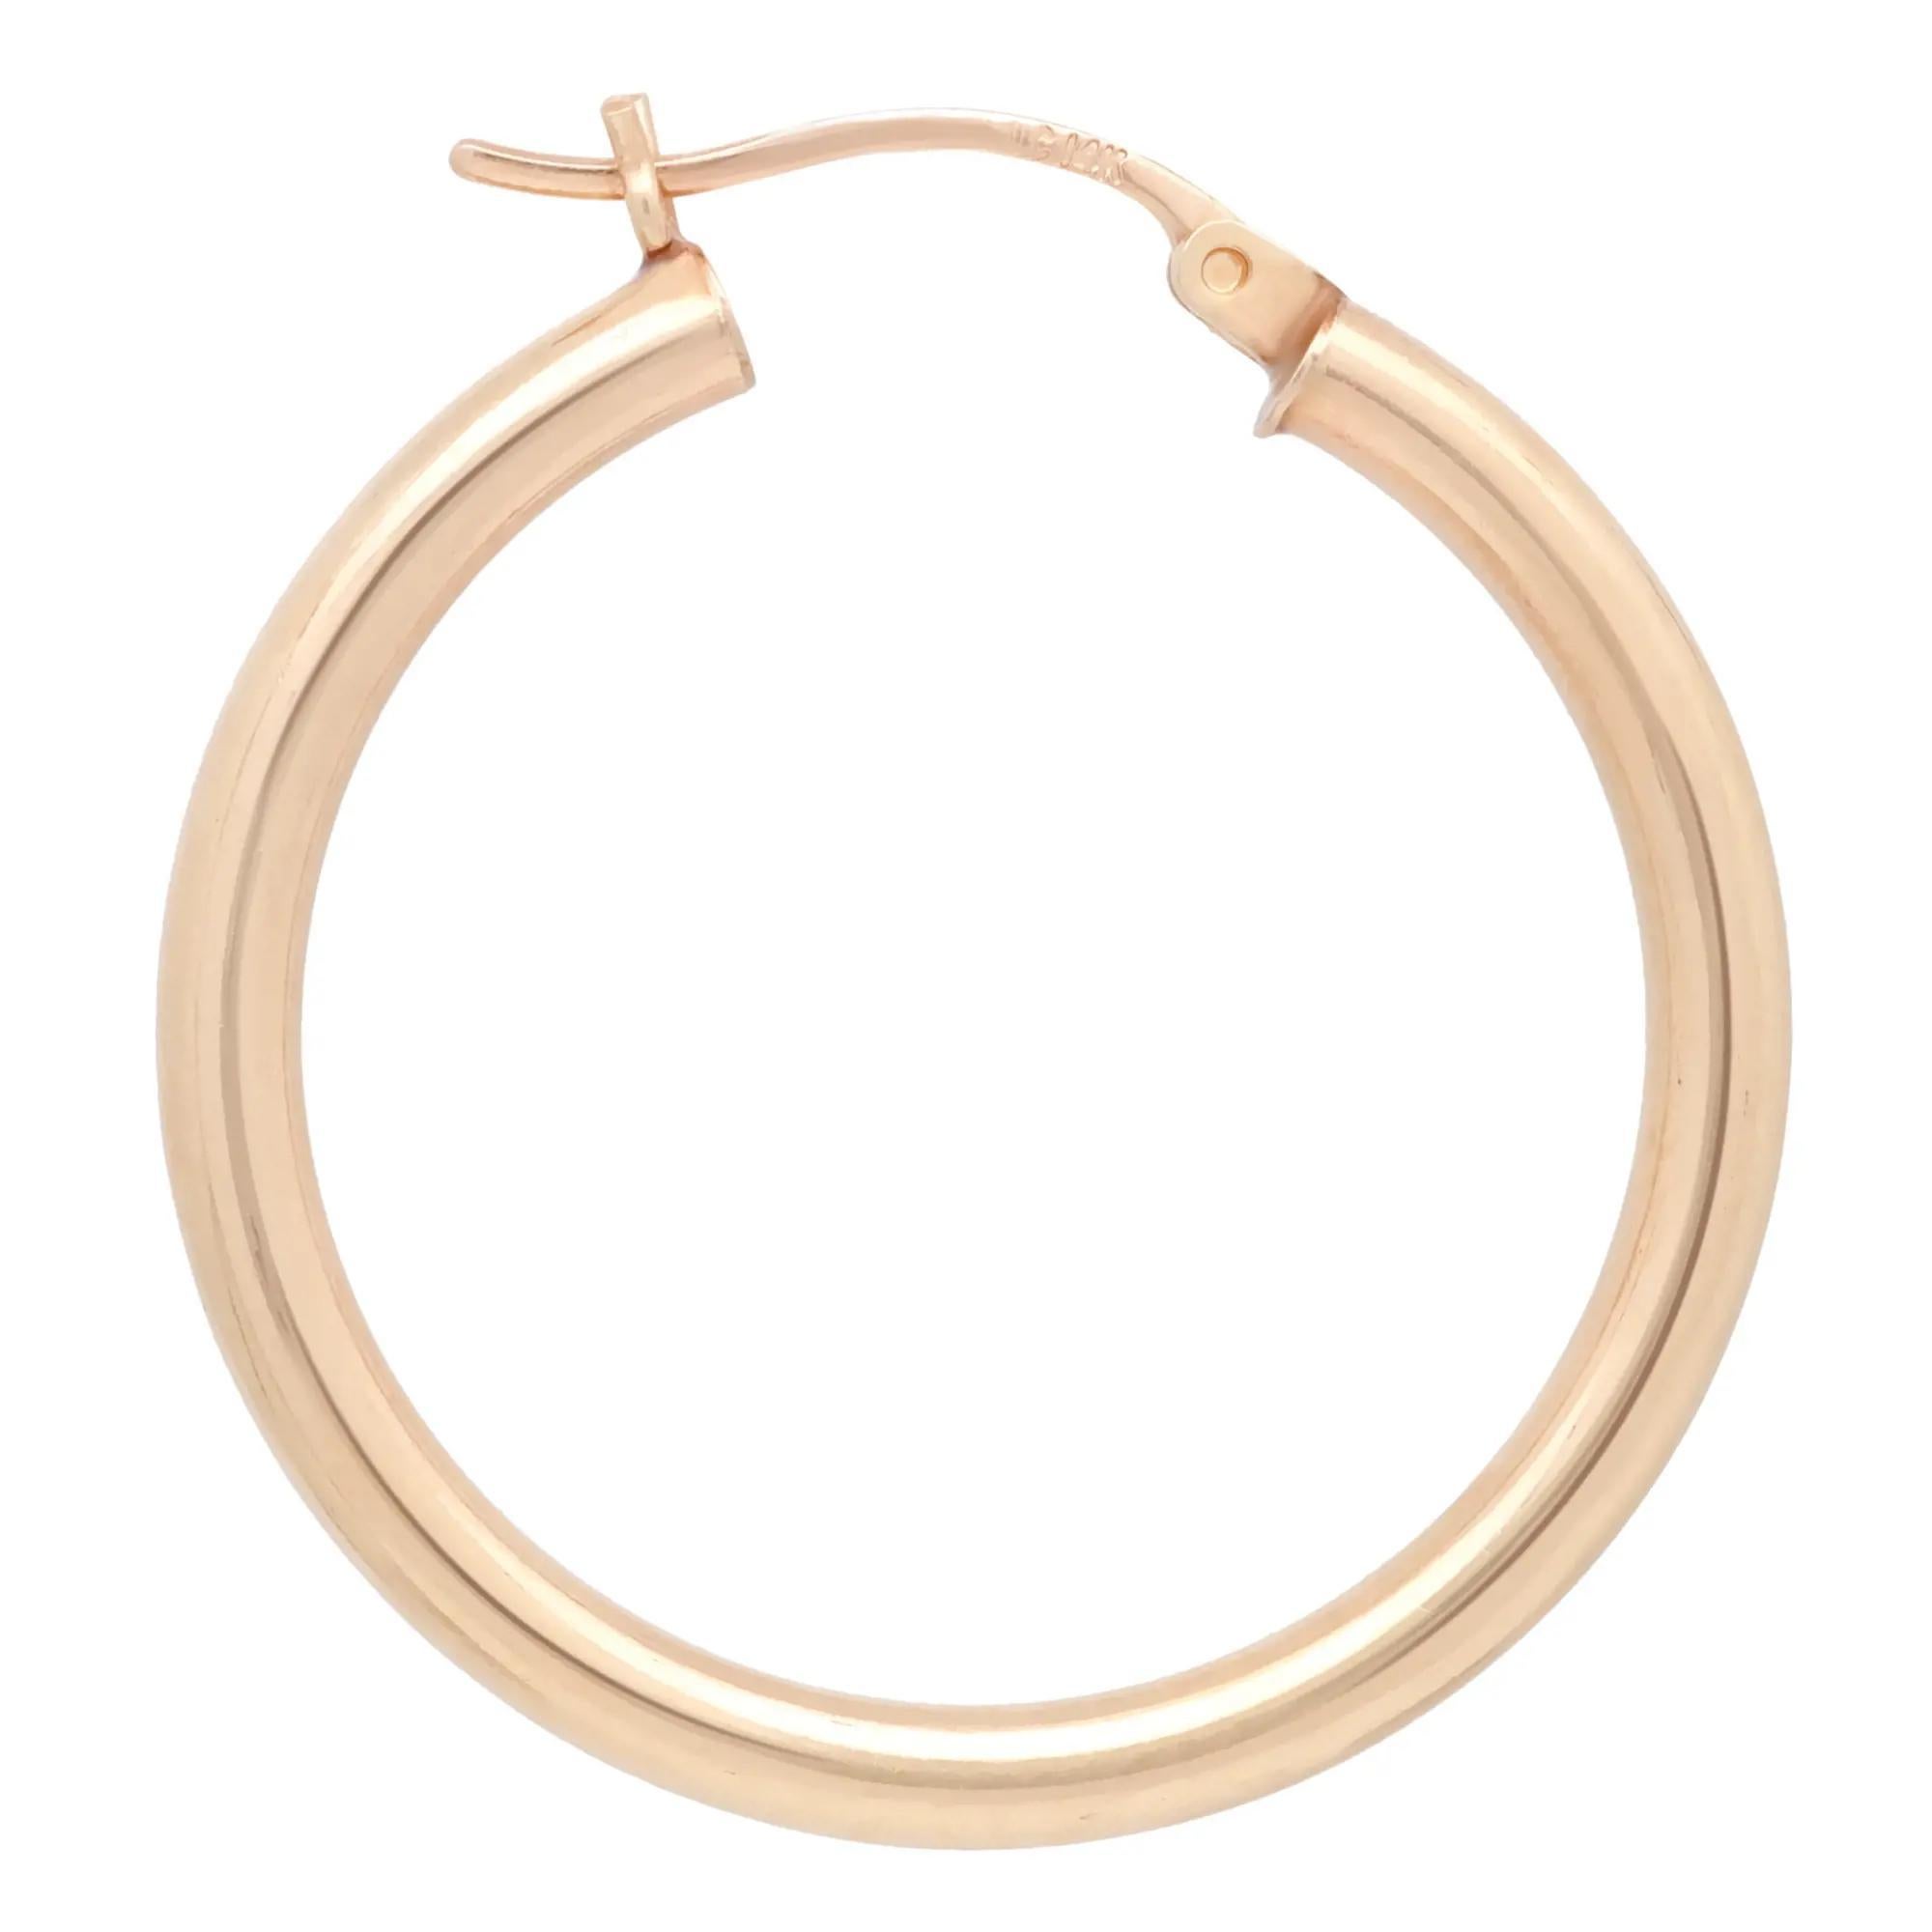 These medium round hoop earrings are crafted in 14k yellow gold and feature a majestic glow of high polish finish. This pair of hoop earrings will make a fashion statement and definitely be an eye catching pair. Size: 1.2 inches. Width: 3 mm.